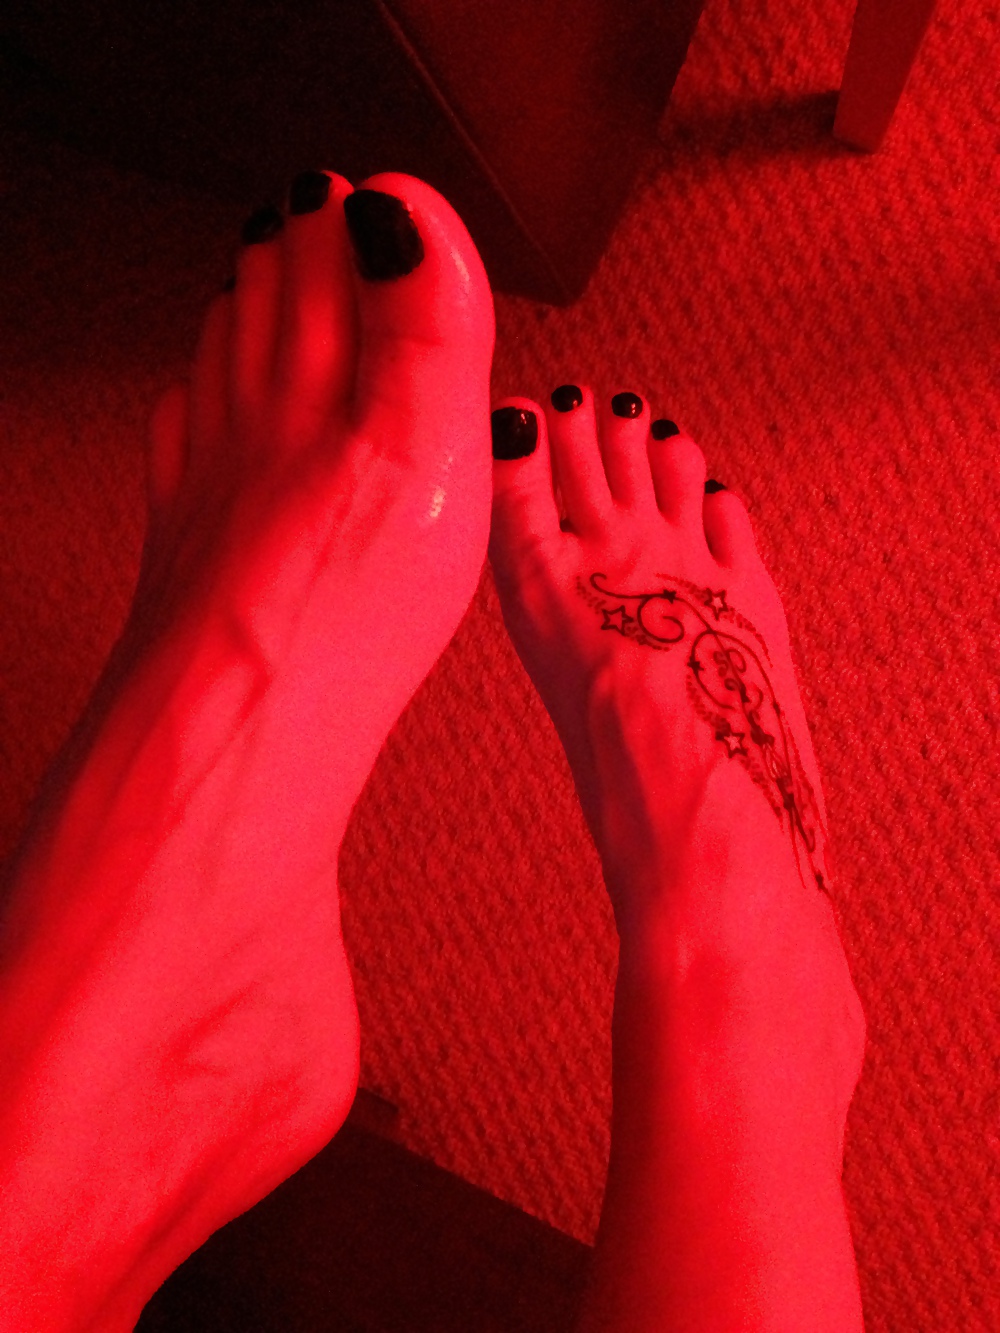 new foot pics for fans of my gf,s feet porn pictures